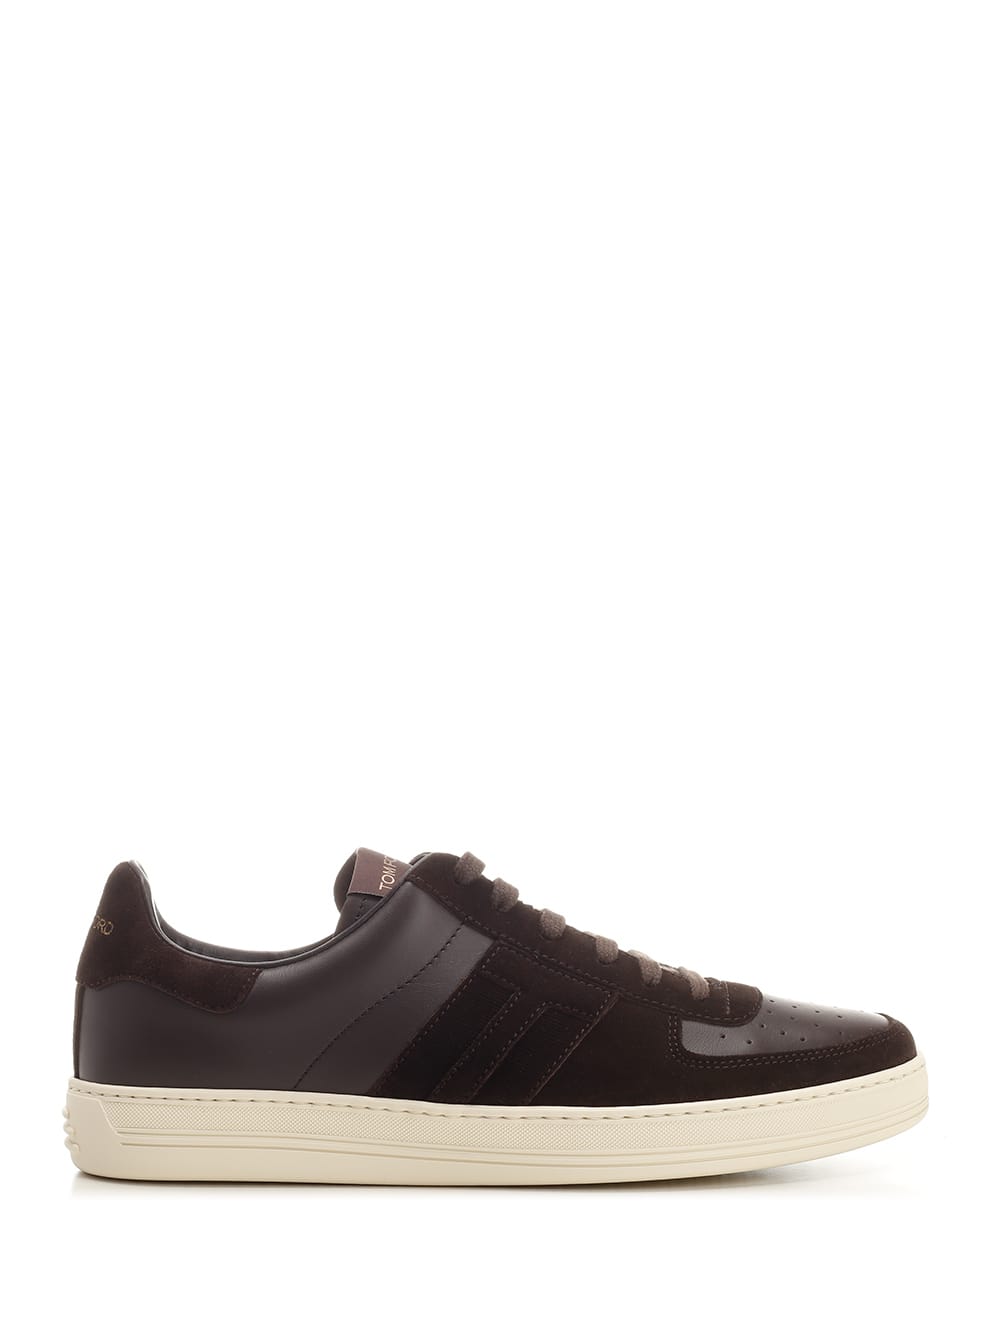 TOM FORD SUEDE AND LEATHER SNEAKERS